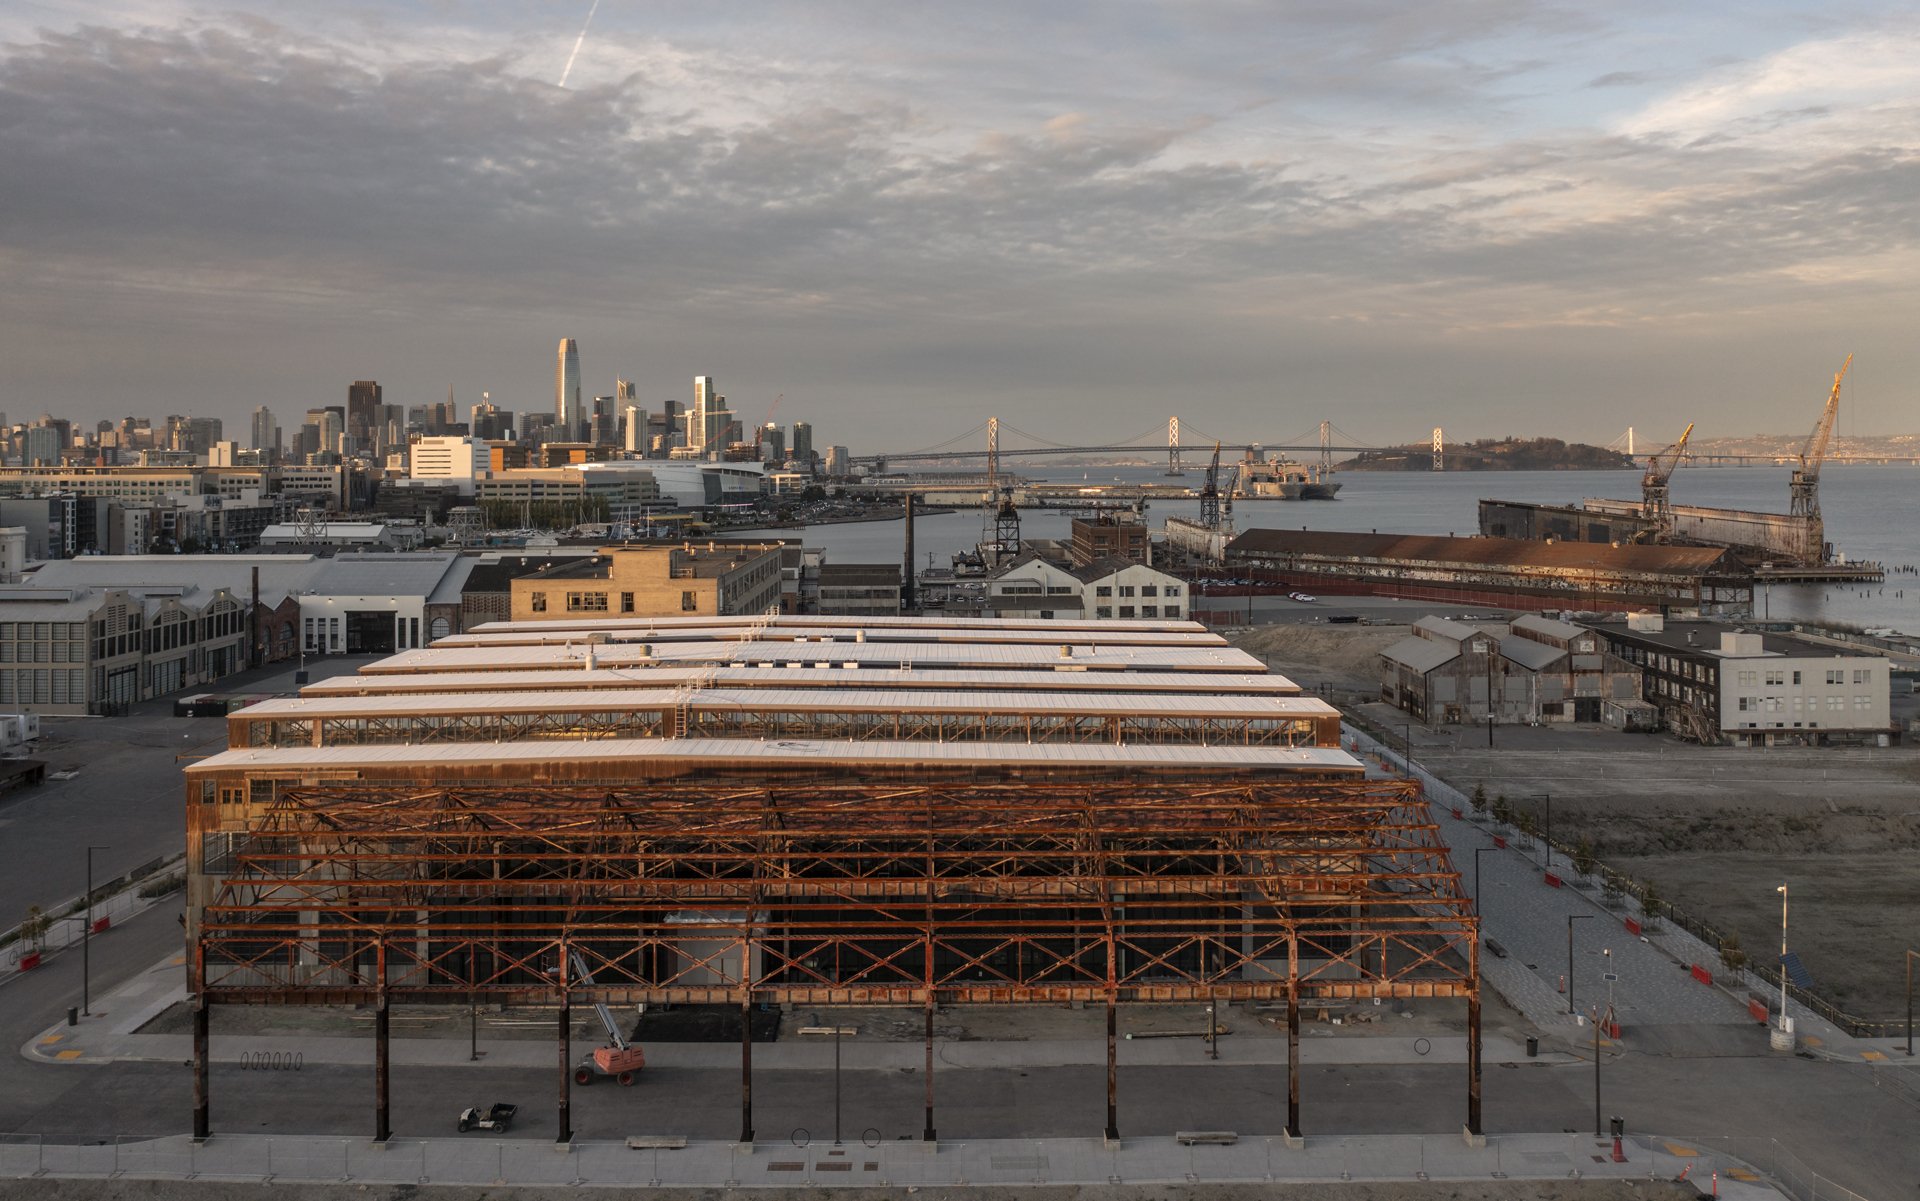 Building 12 at Pier 70